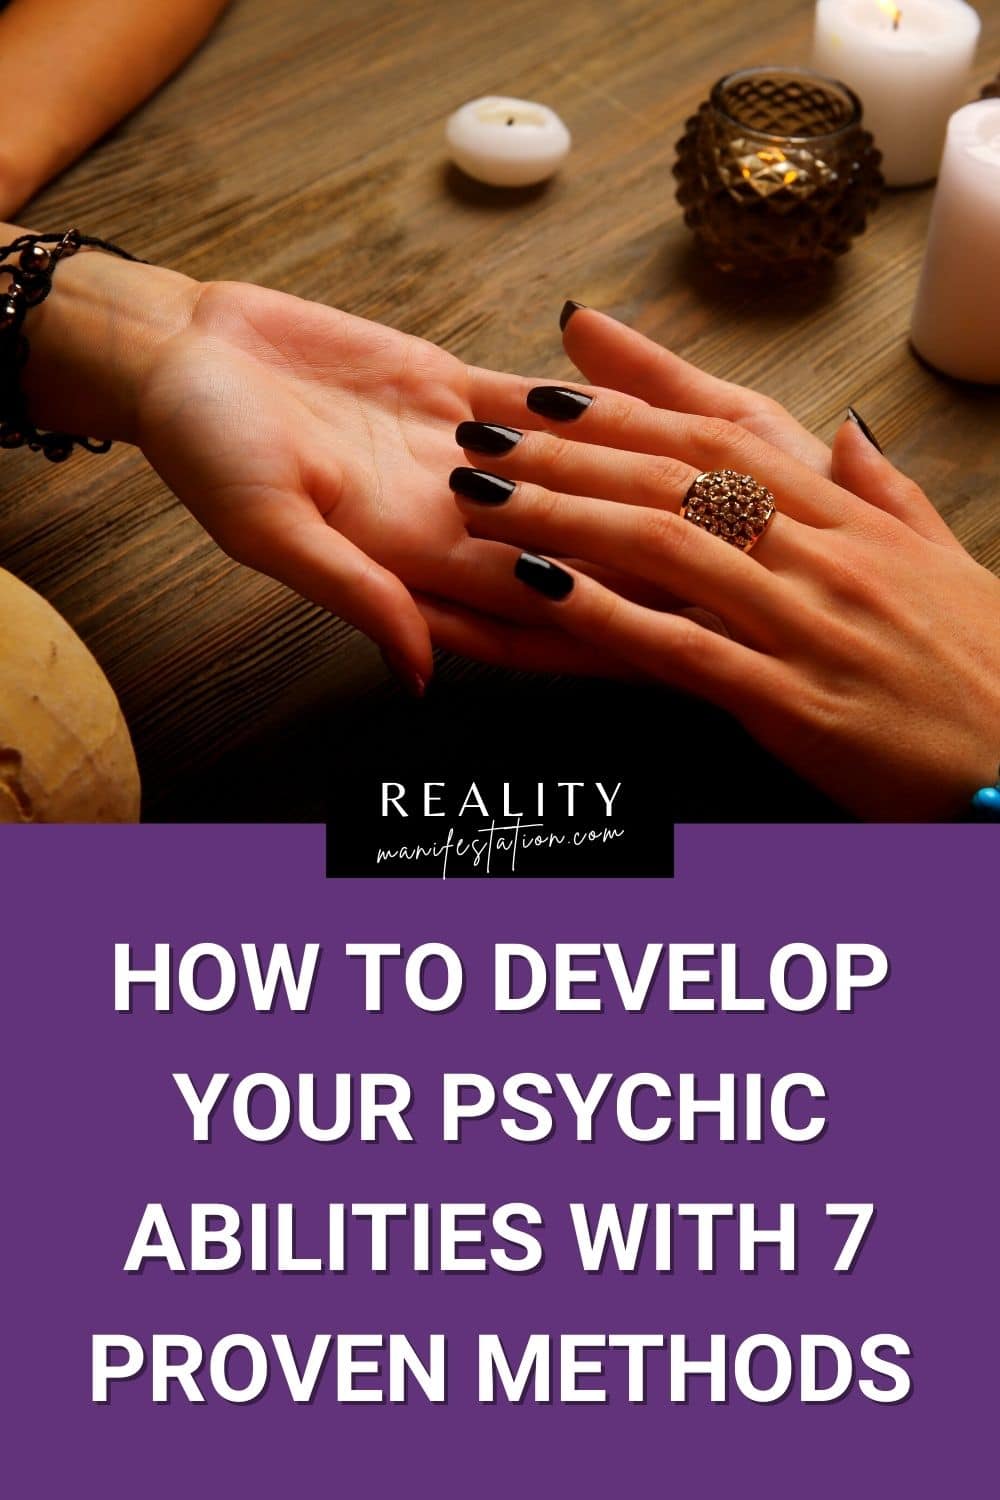 Pinterest pin with a hand with a ring brushing over someones palm giving them a psychic reading with text underneath saying How To Develop Your Psychic Abilities With 7 Proven Methods